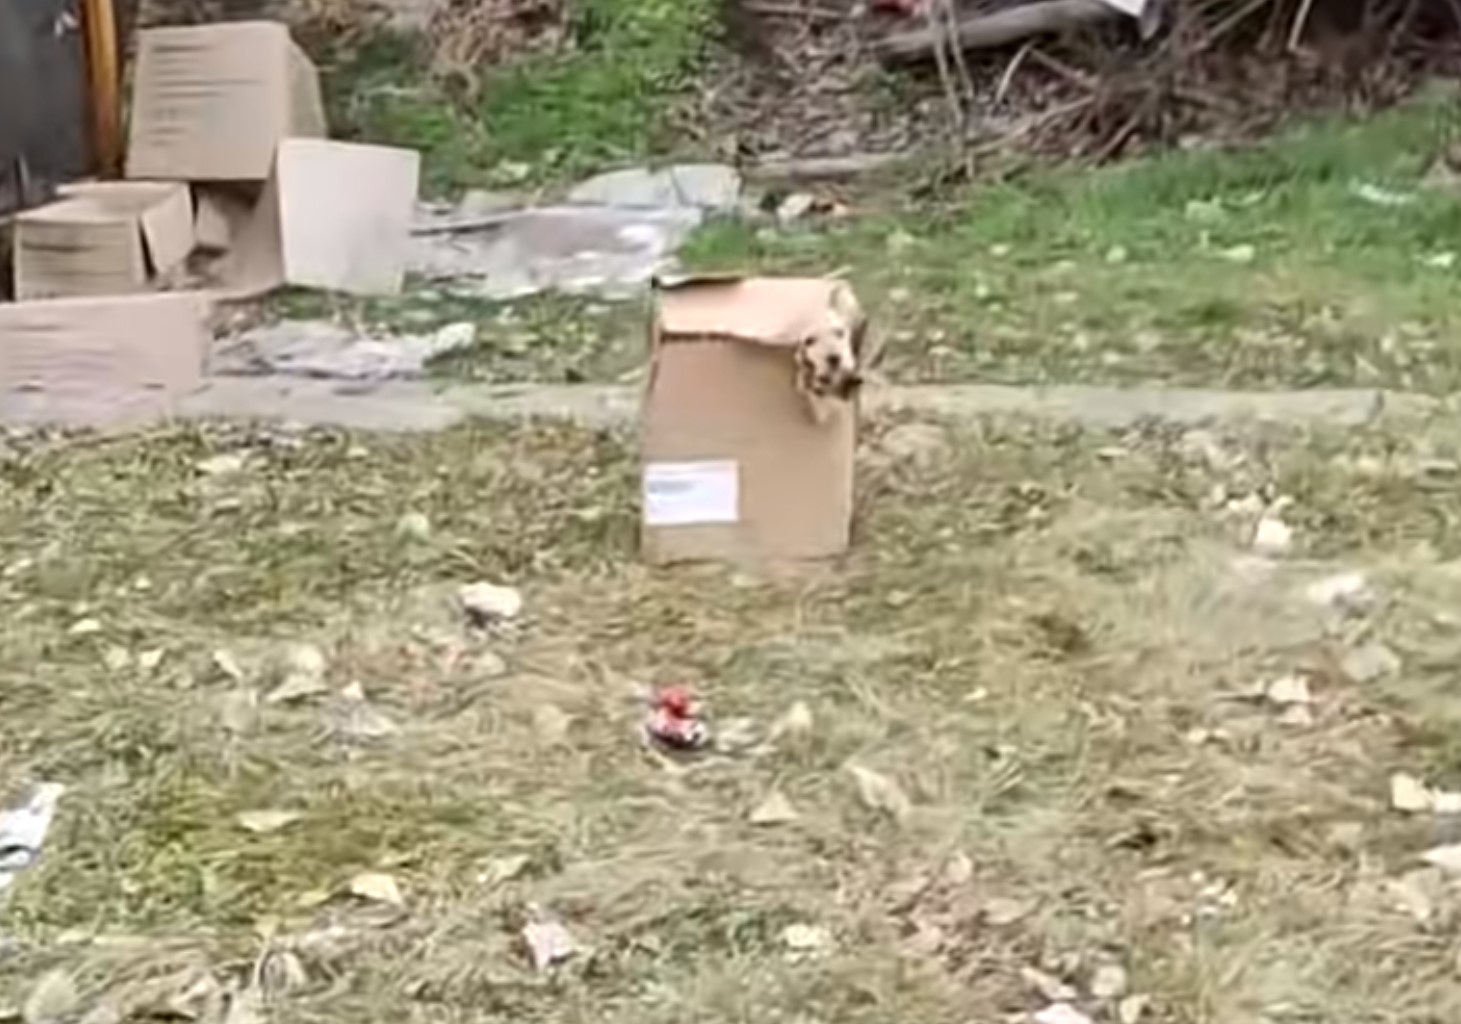 abandoned puppy in a box